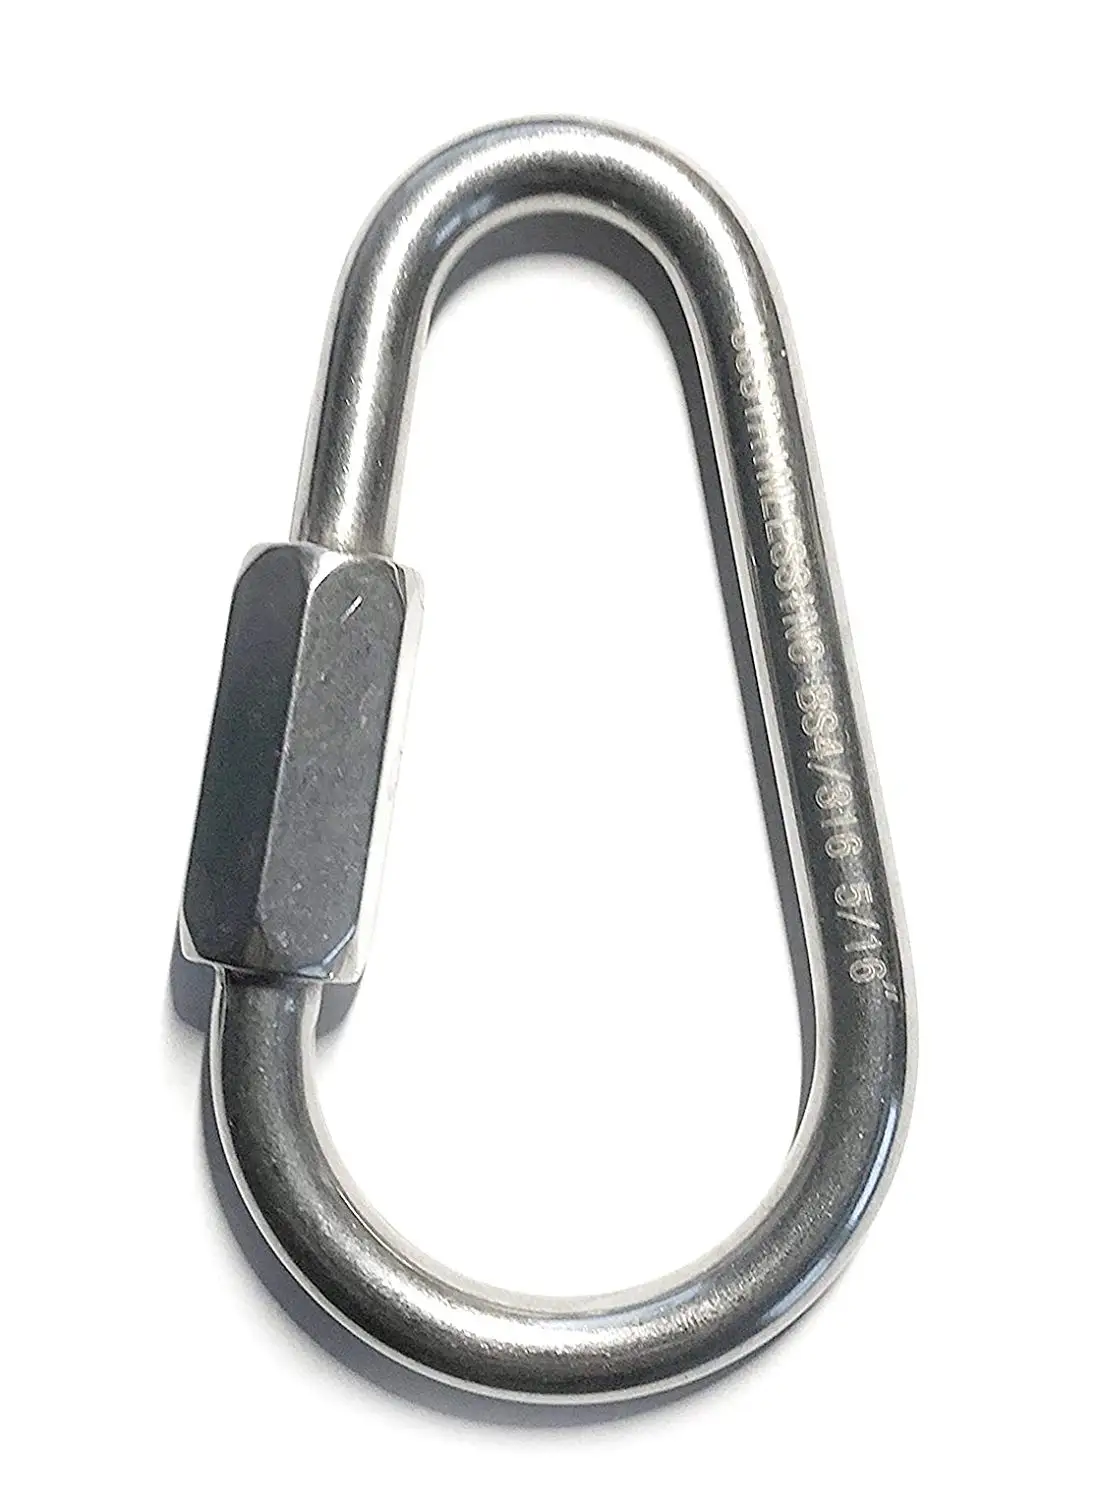 Marine Grade Stainless Steel 316 Quick Link Wide Jaw 5/16 8mm 